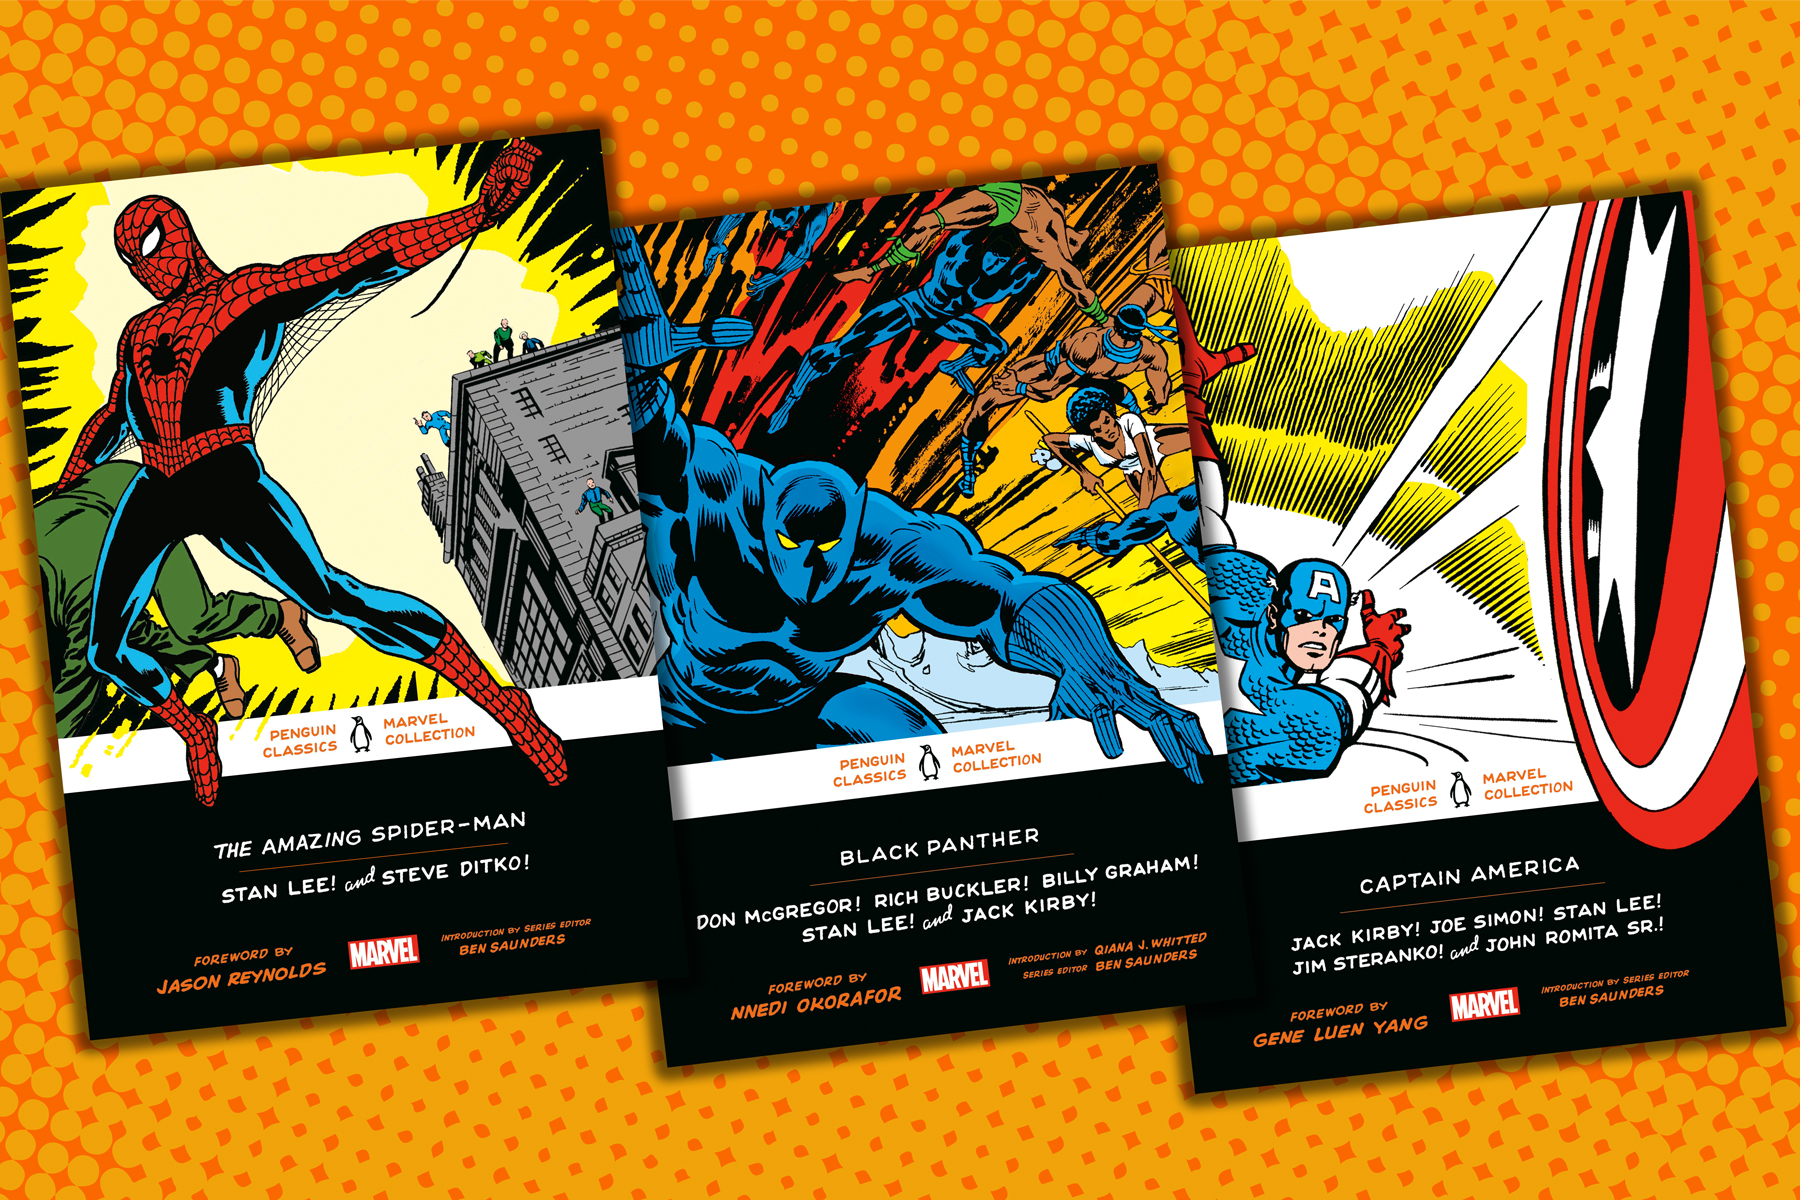 Why Marvel Comics Joining the Penguin Classics’ Line Is a Big Deal